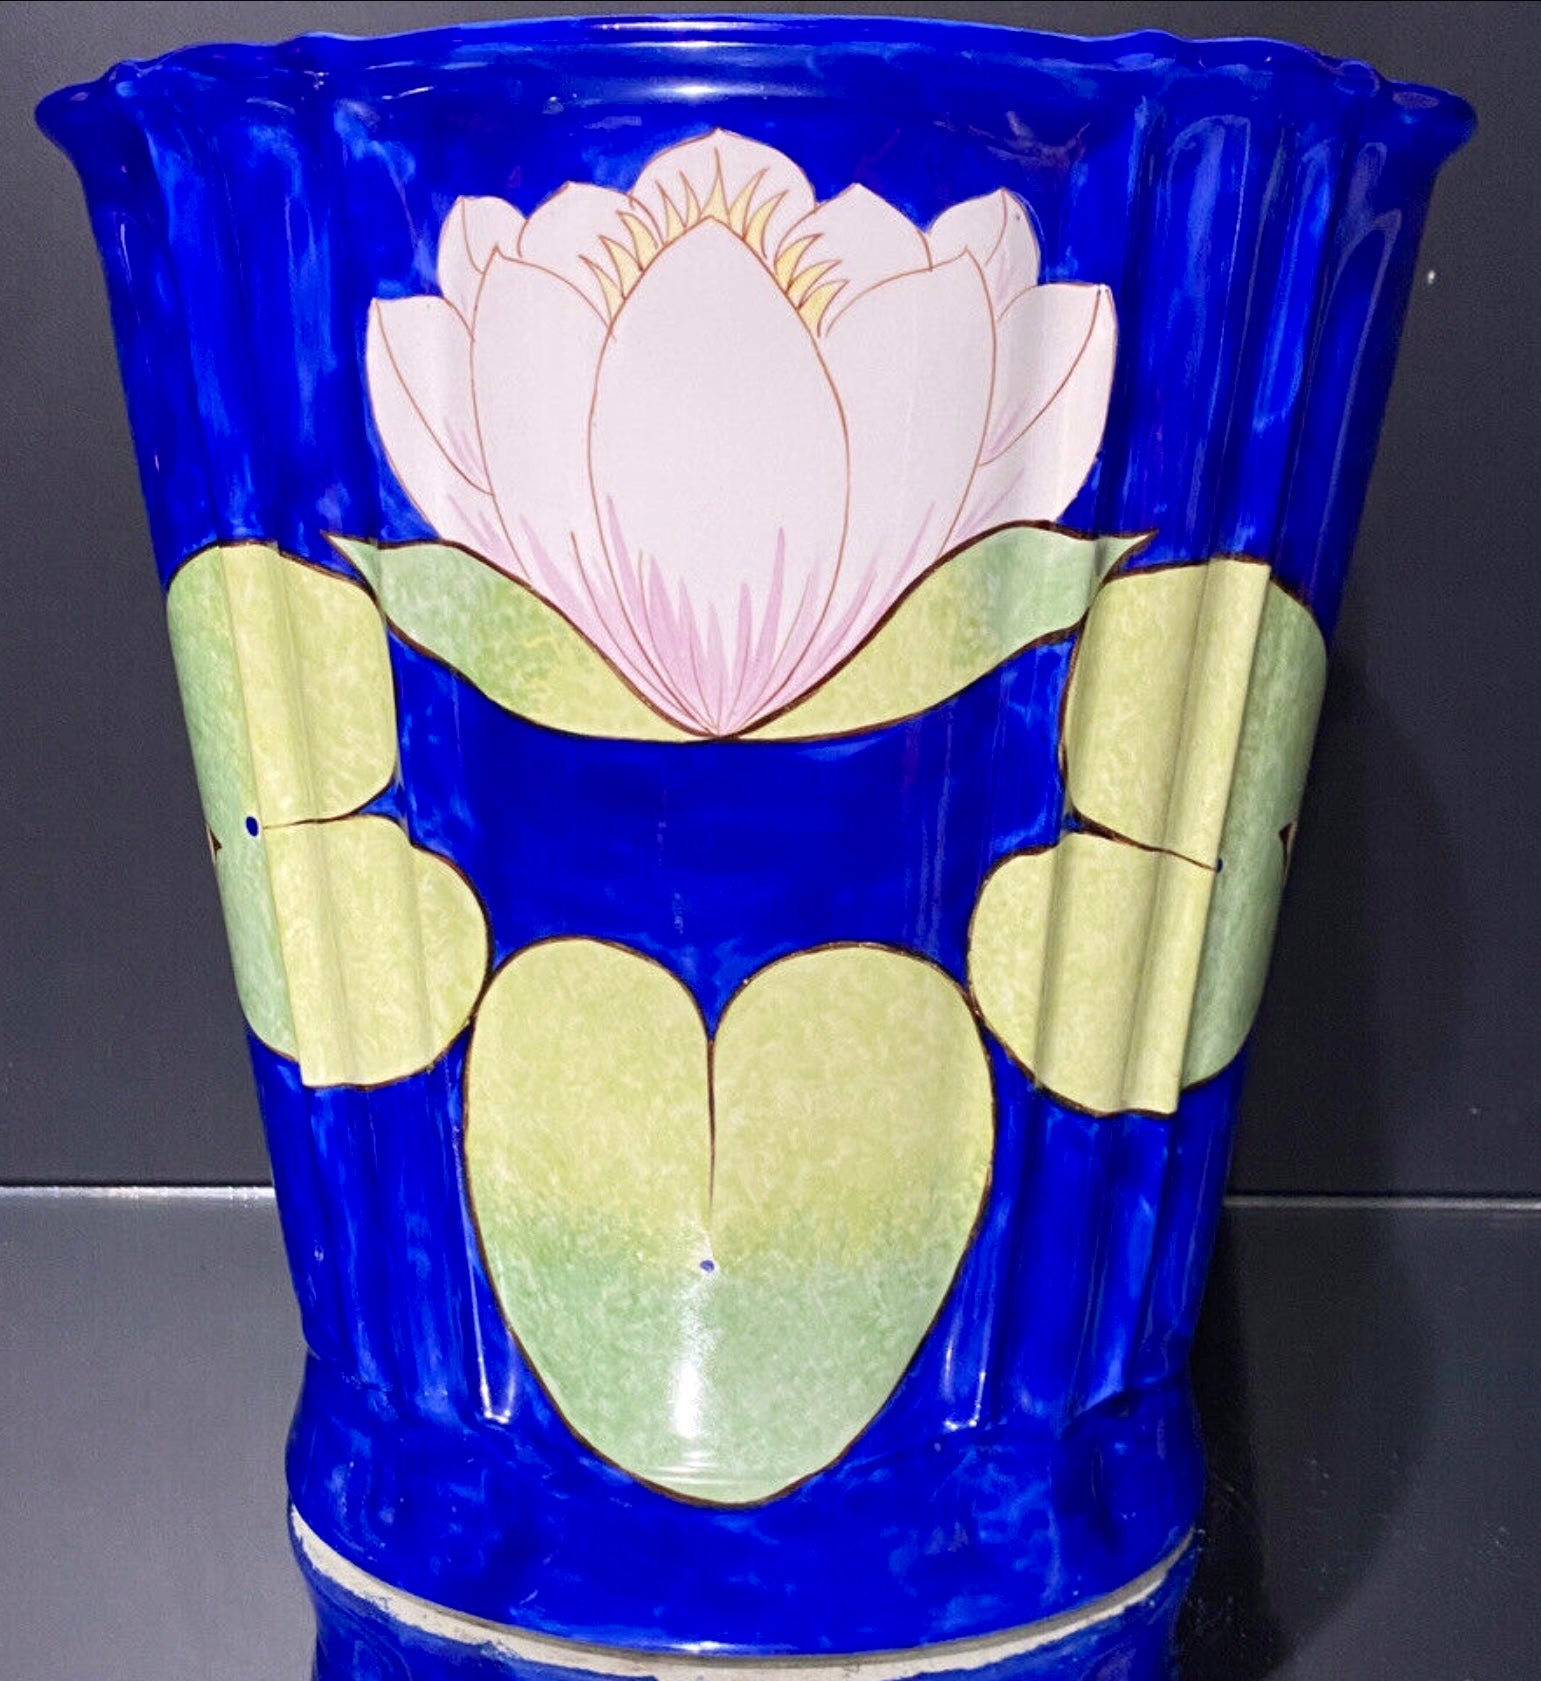 Hollywood Regency Sherle Wagner Pink Waterlilly Wastebasket with Butterfly, Italy, 1960s.